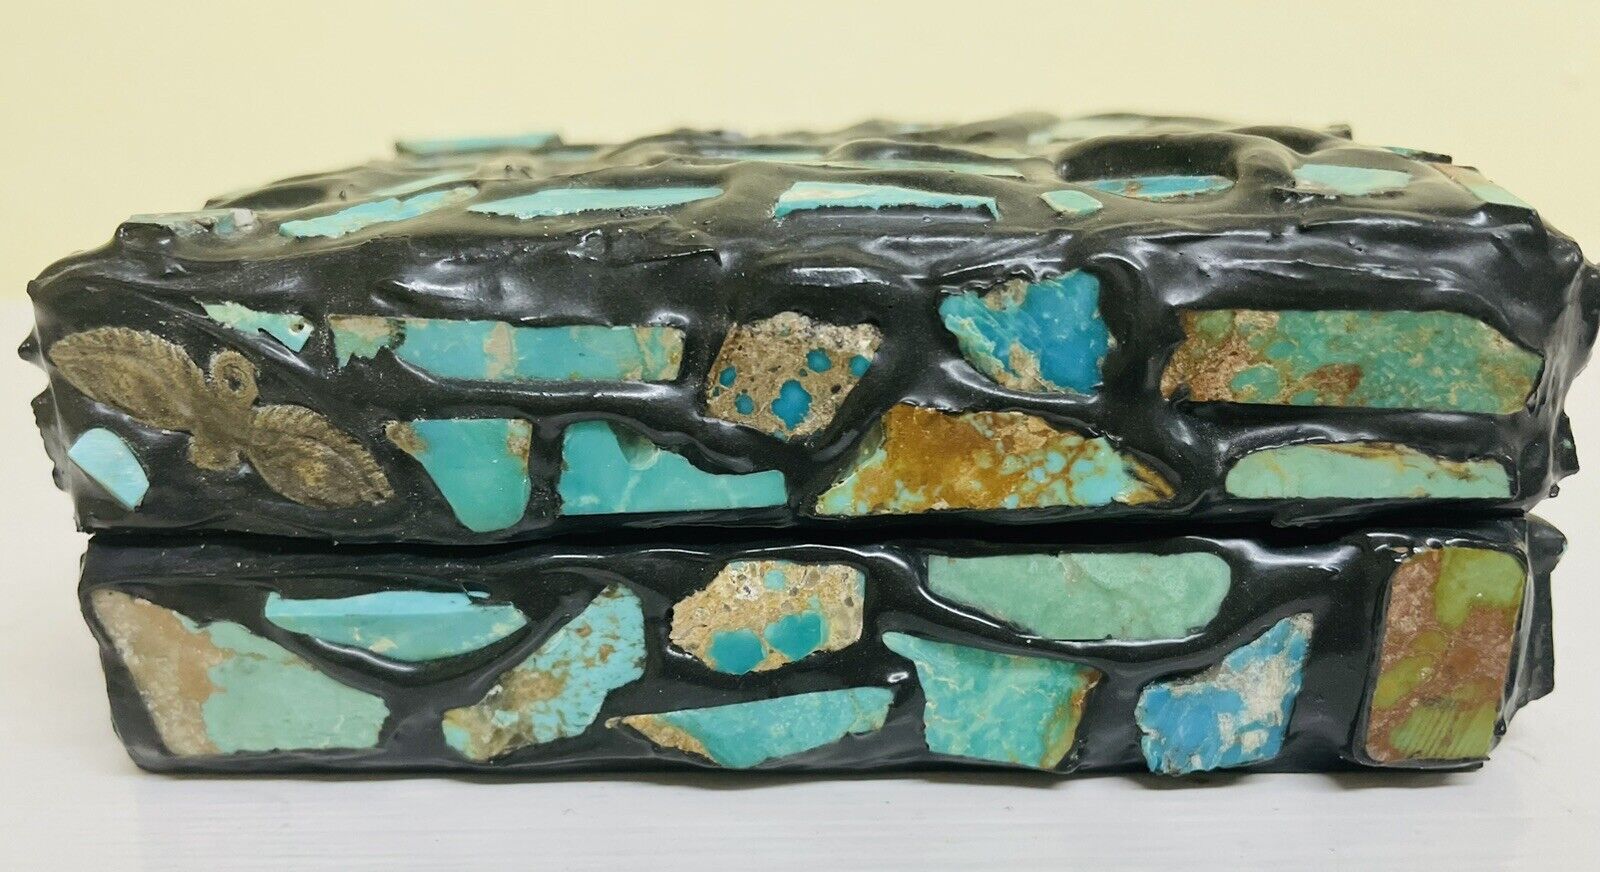 Vtg OOAK Small Black 4.5” Box with 80+ Mounted Turquoise Stones & 5 Tin Charms